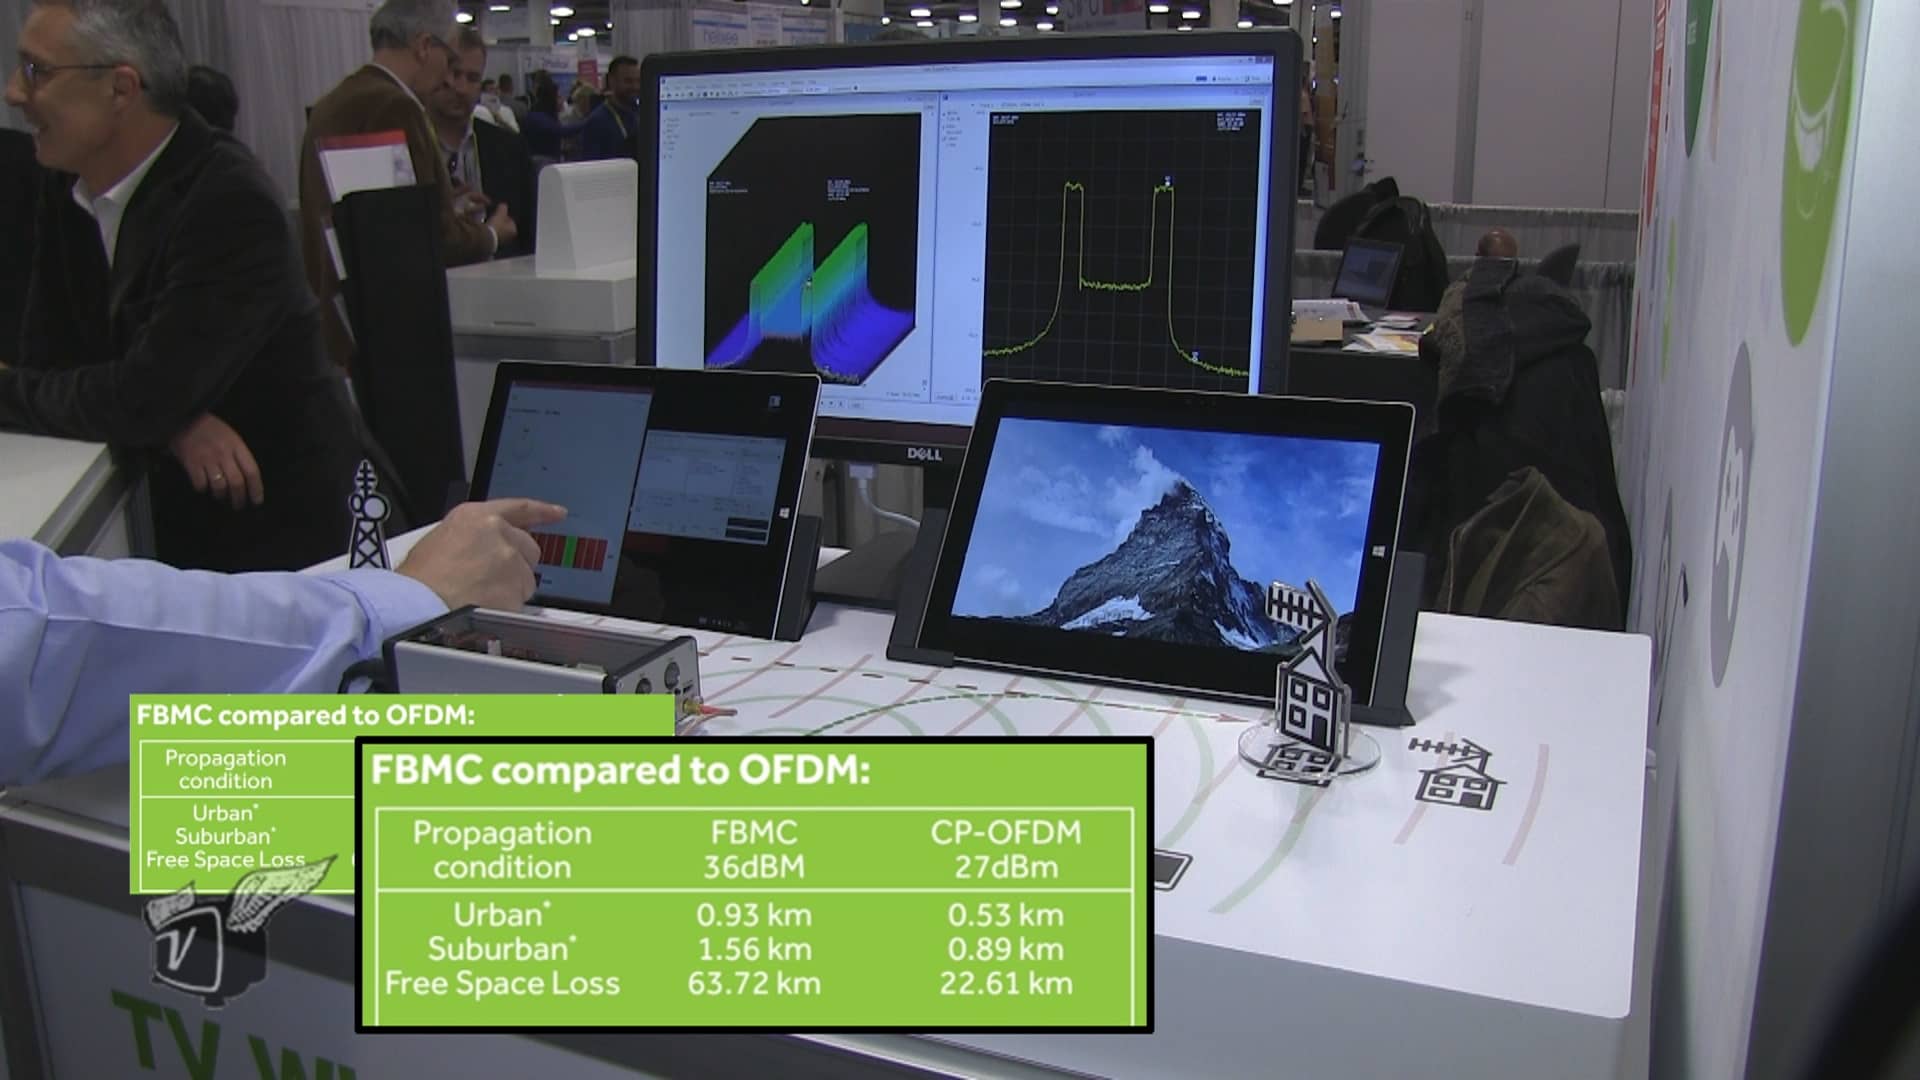 The LETI demonstration shown at CES 2016, along with the FBMC performance compared to OFDM.